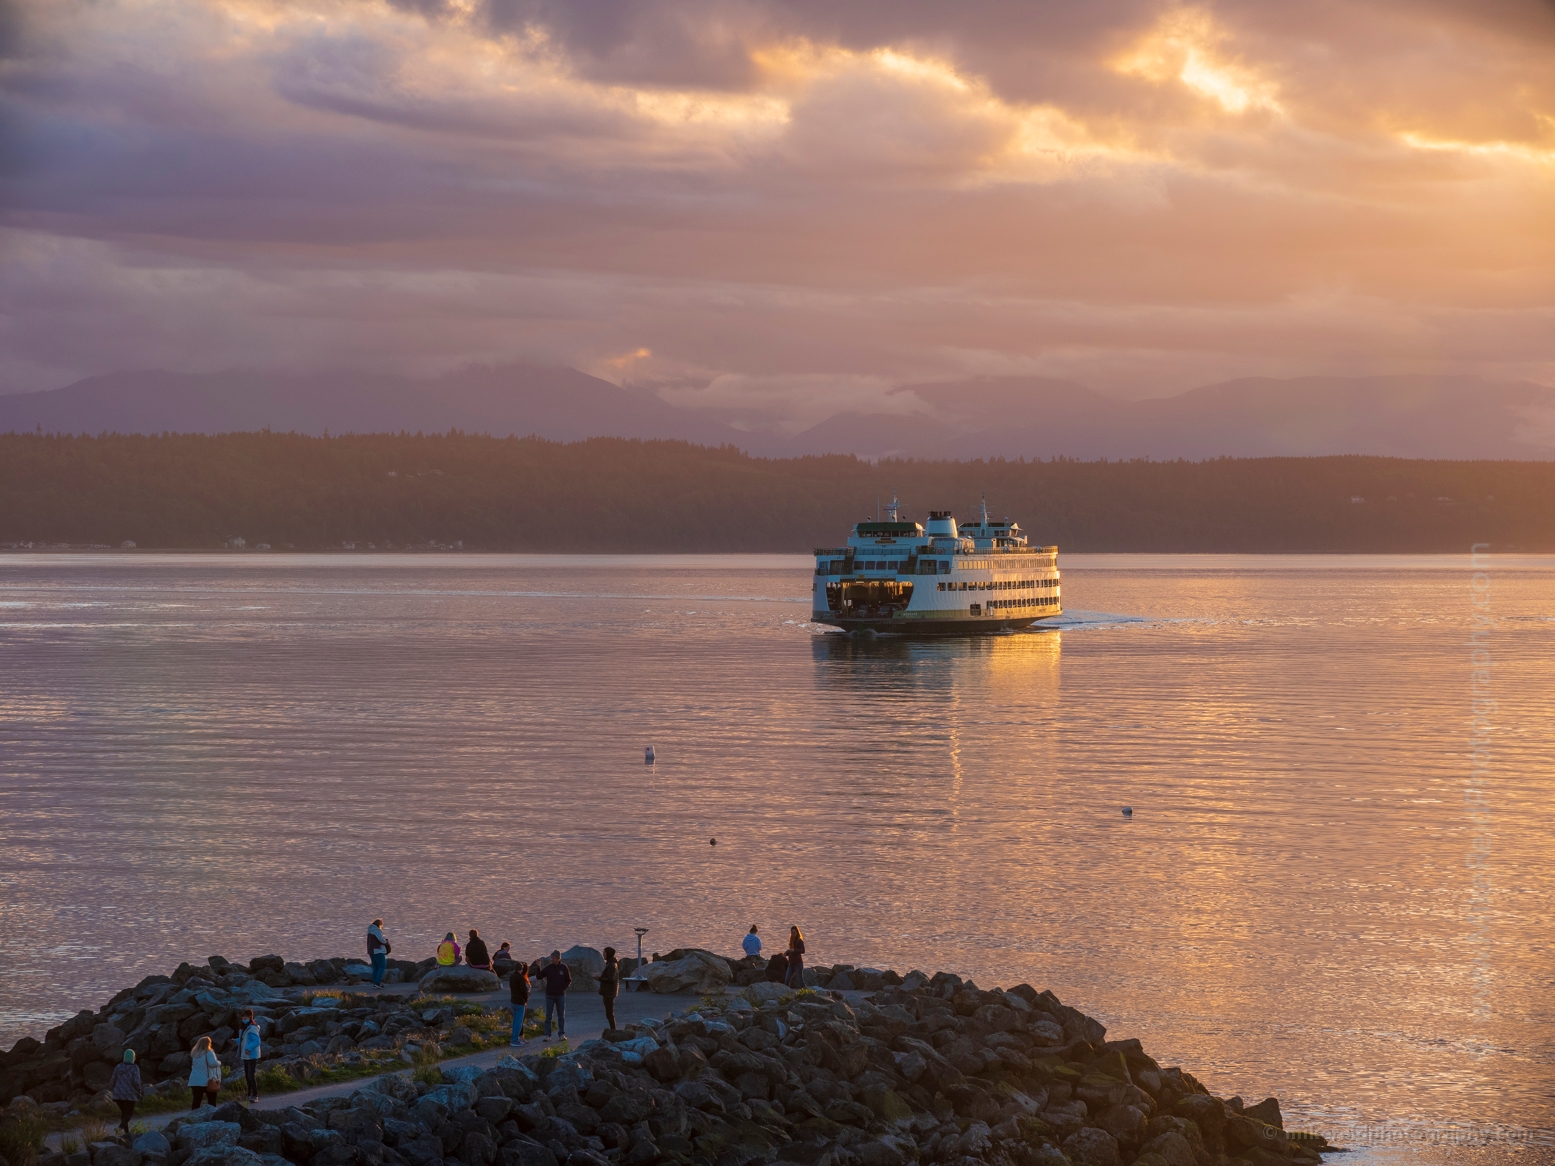 Edmonds Photography Ferry Arriving at Sunset